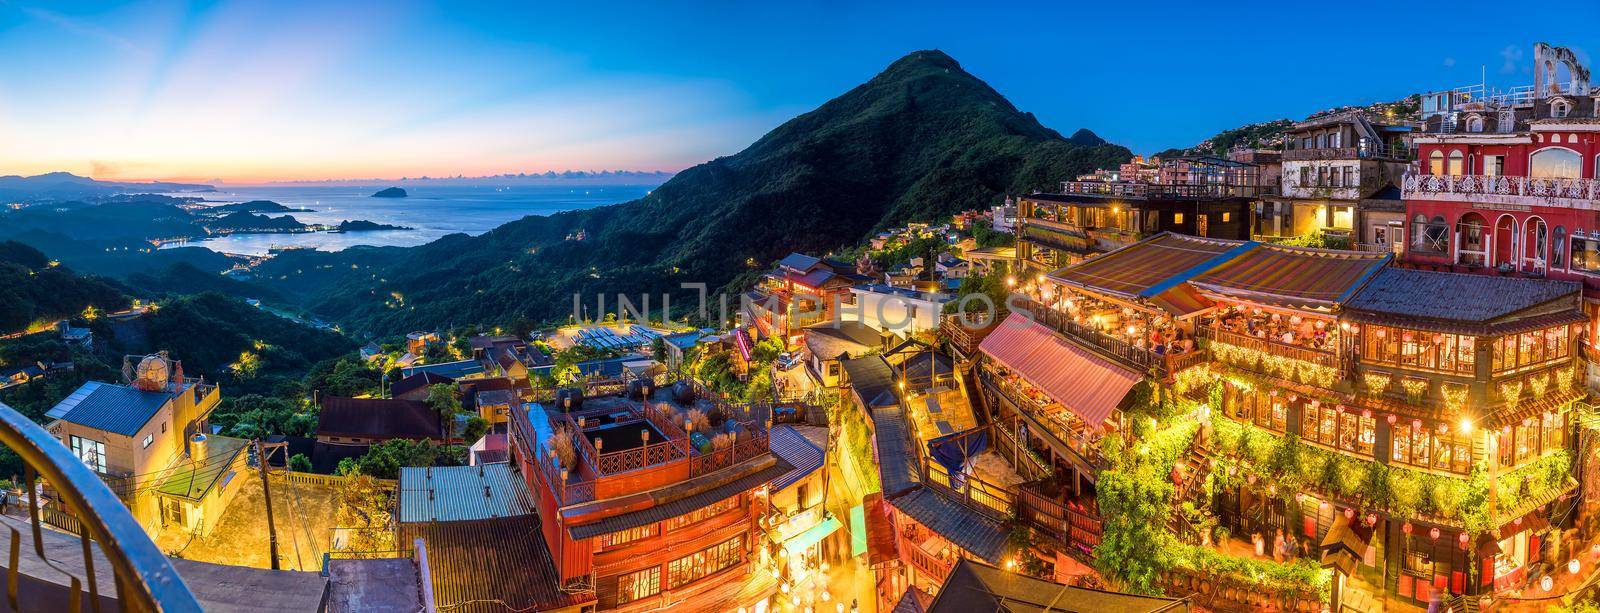 Top view of Jiufen Old Street in Taipei  by f11photo